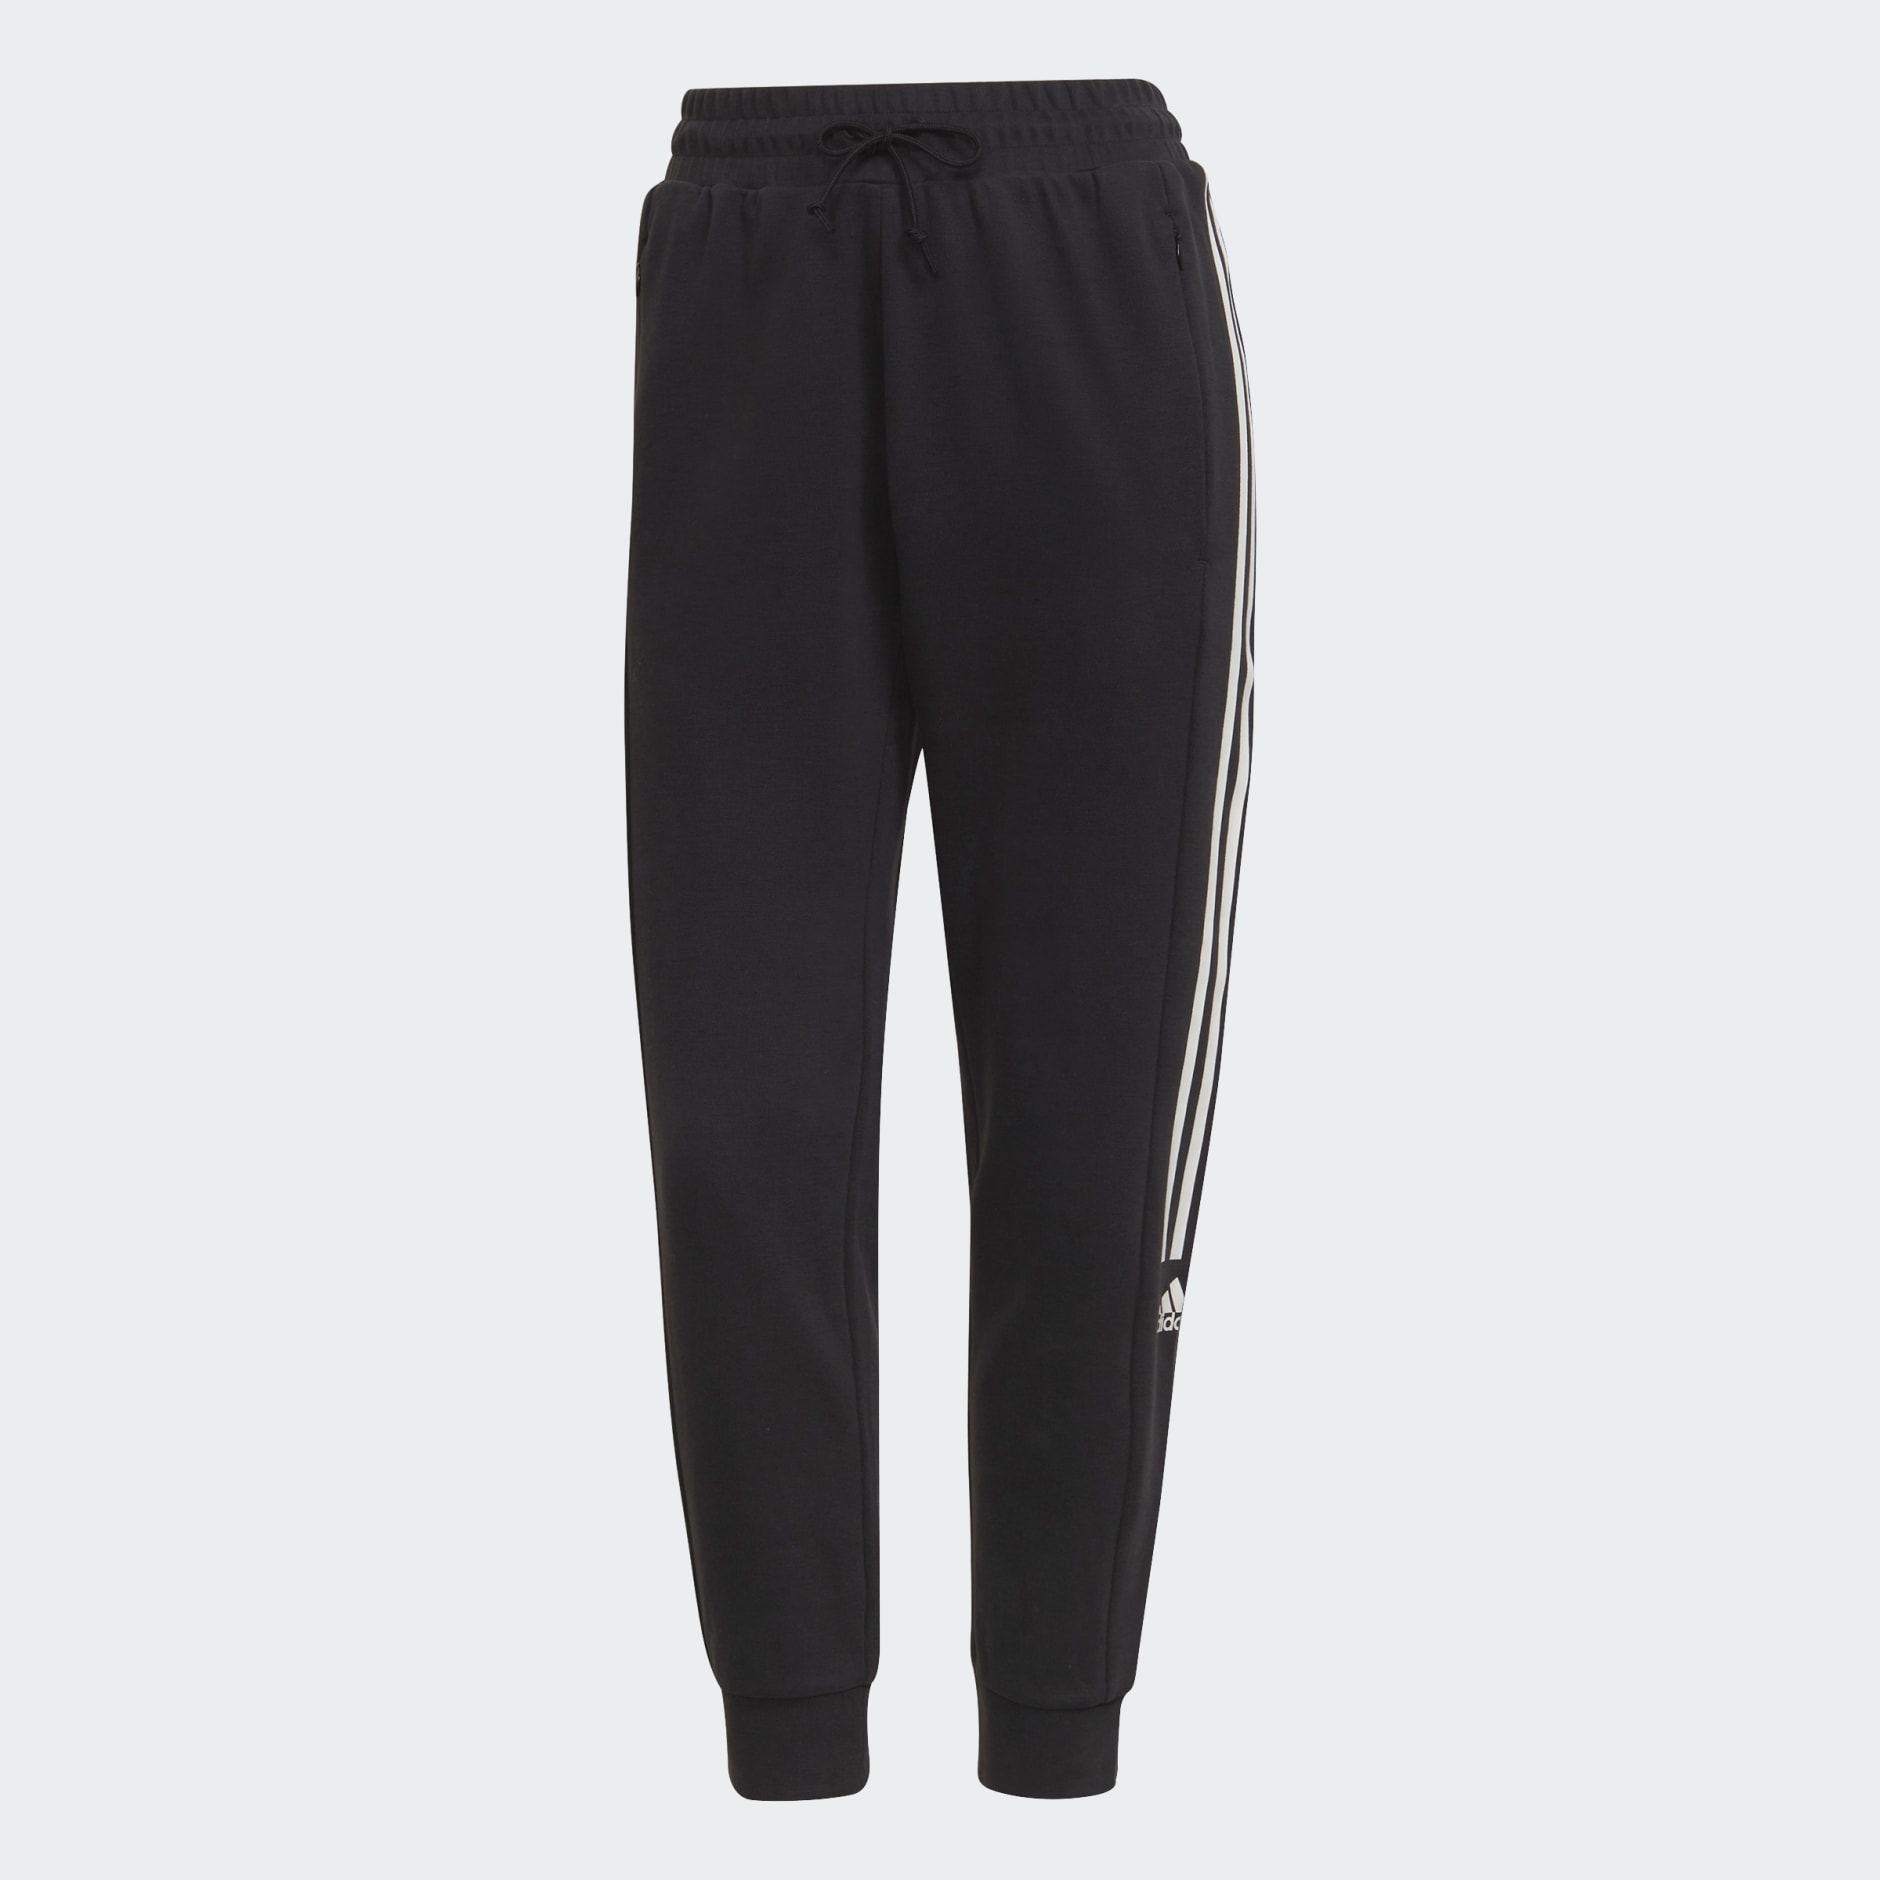 Black Soft Touch Track Pant - Sweats